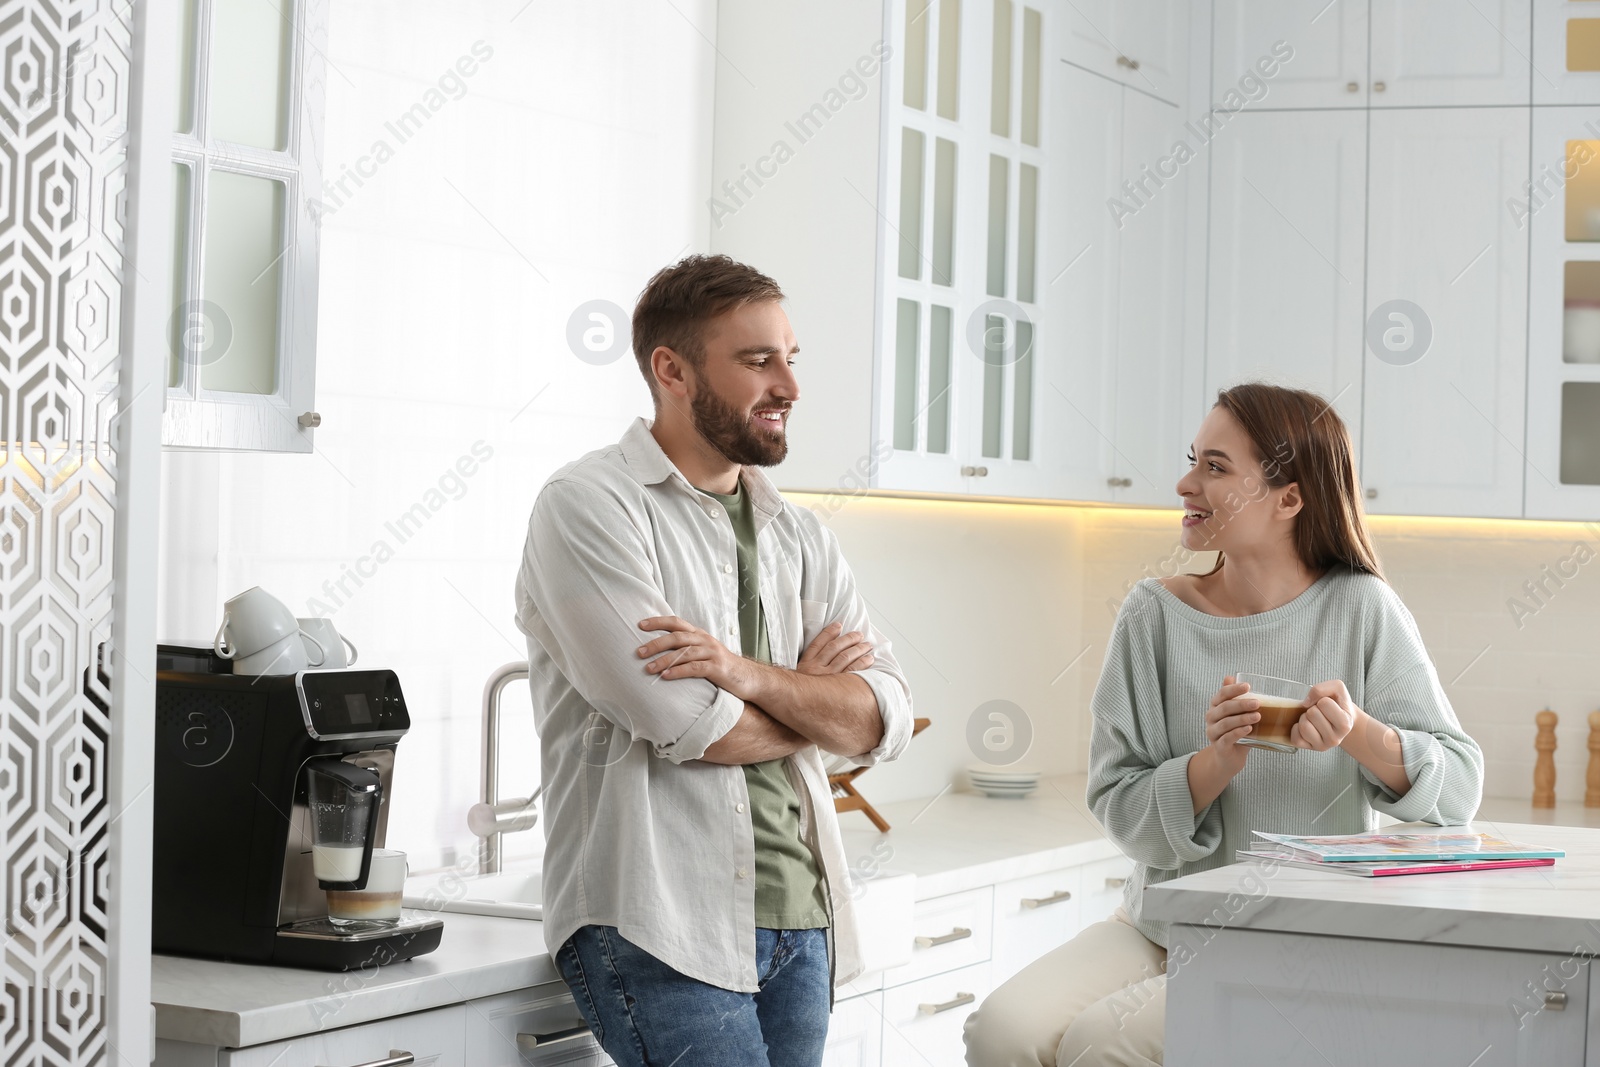 Photo of Young man talking with his girlfriend while using modern coffee machine in kitchen